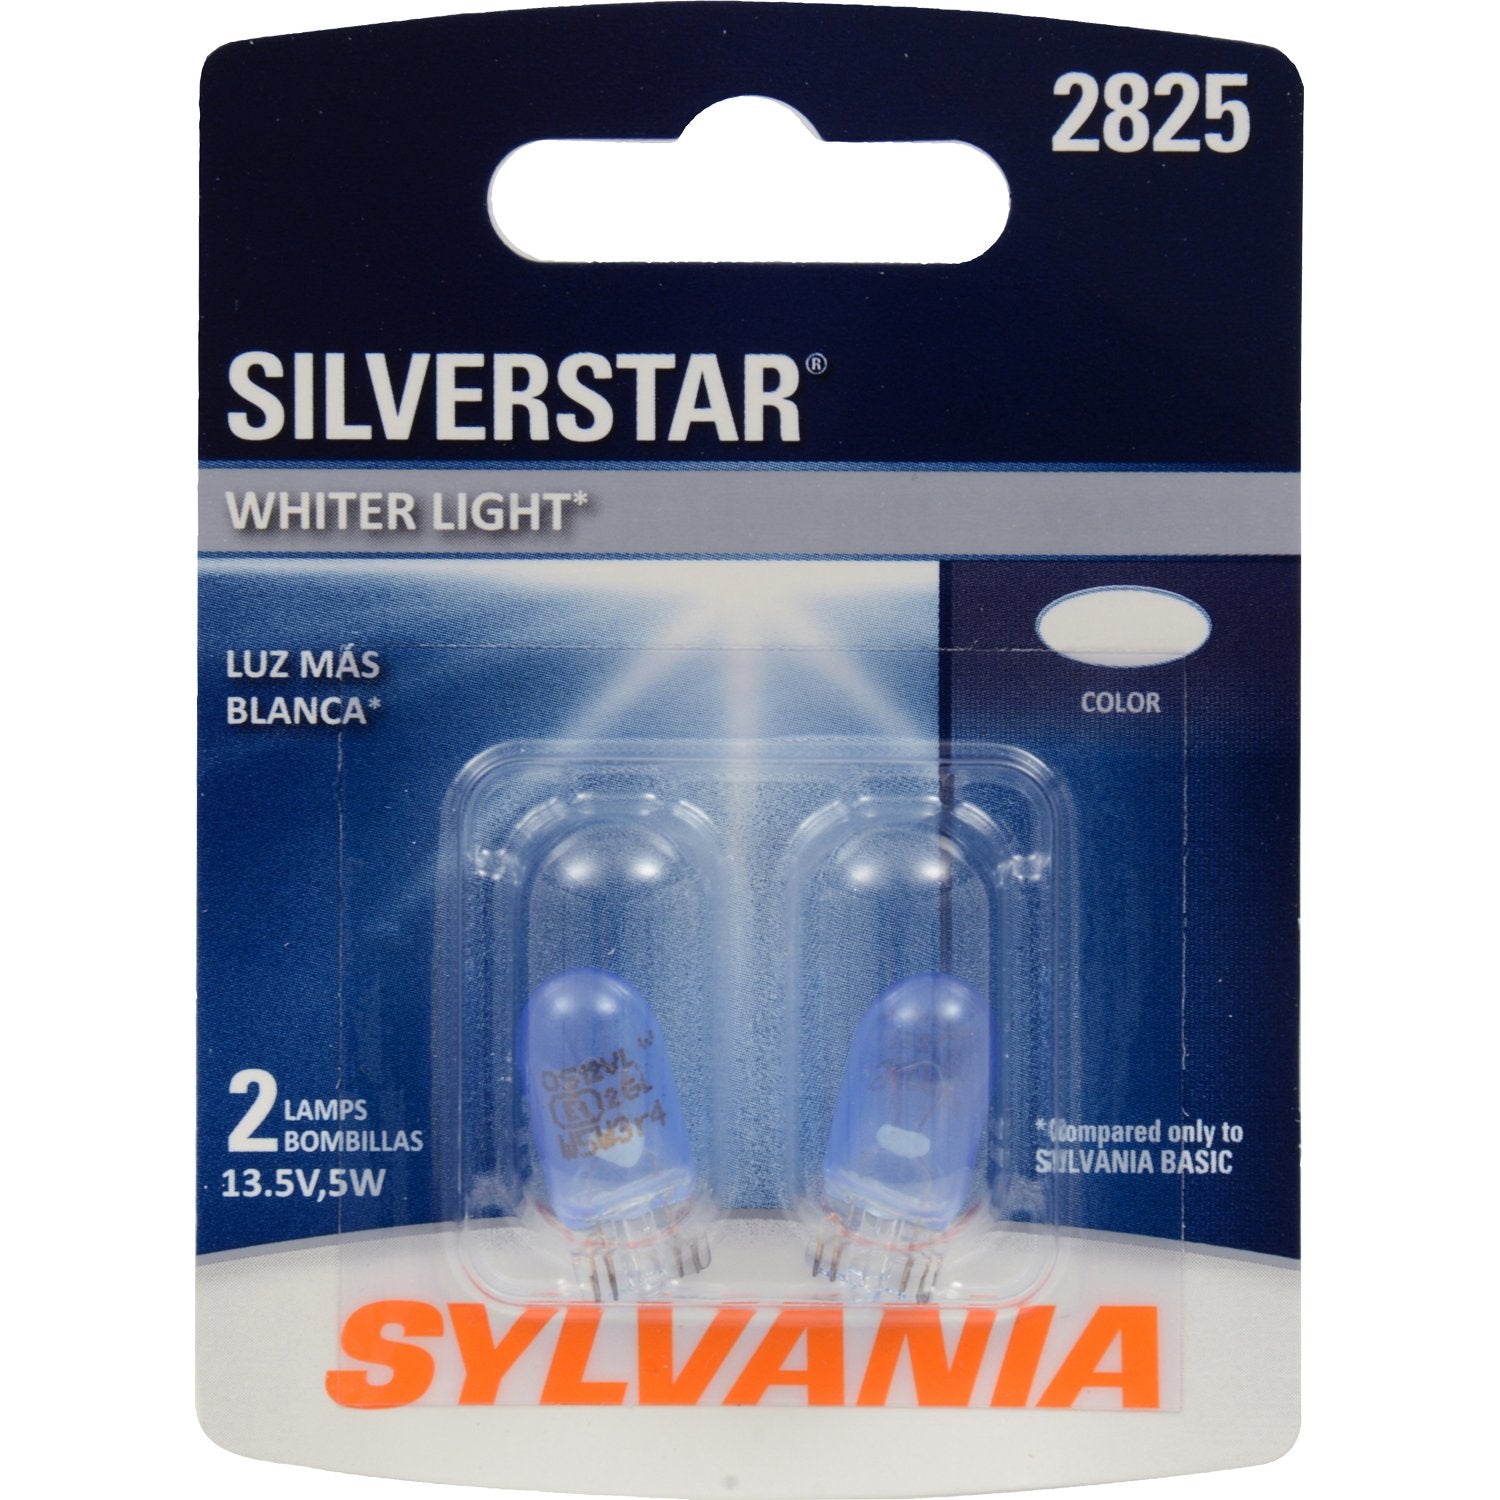 SYLVANIA - 2825 SilverStar Mini Bulb - Brighter and Whiter Light, Ideal for Interior Lighting - Map, Cargo and License Plate (Contains 1 Bulb)